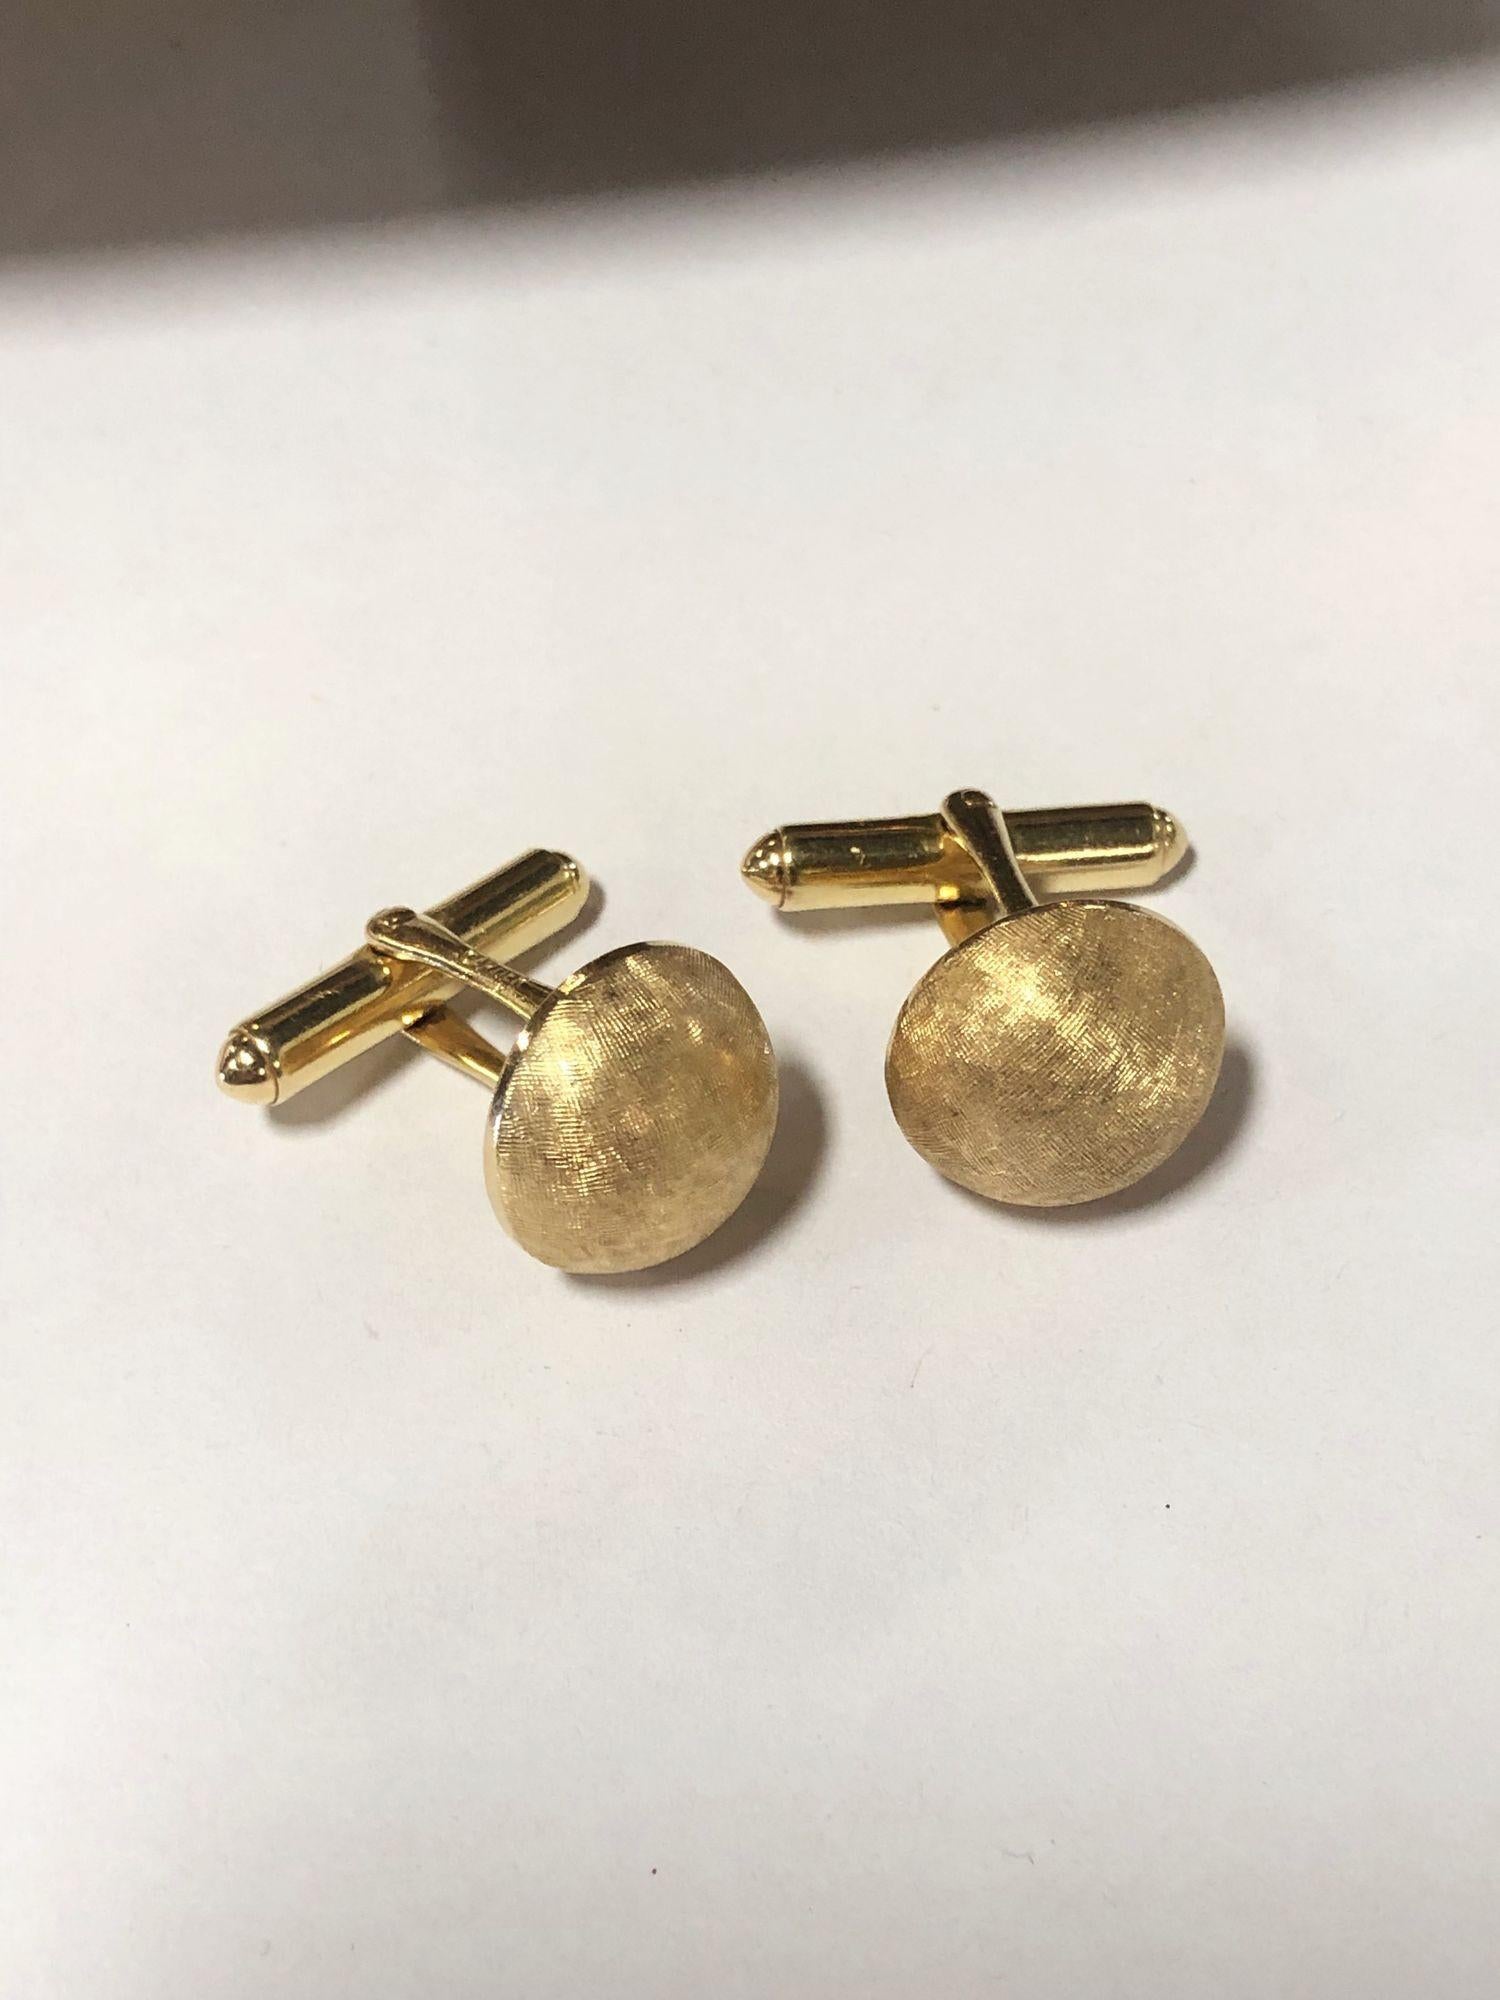 Exquisite and timeless estate jewelry, these vintage mid-century Cartier cufflinks exude opulence. Crafted in gleaming brushed gold, their classic mid-century design showcases Cartier's elegance and sophistication. A luxurious statement accessory,